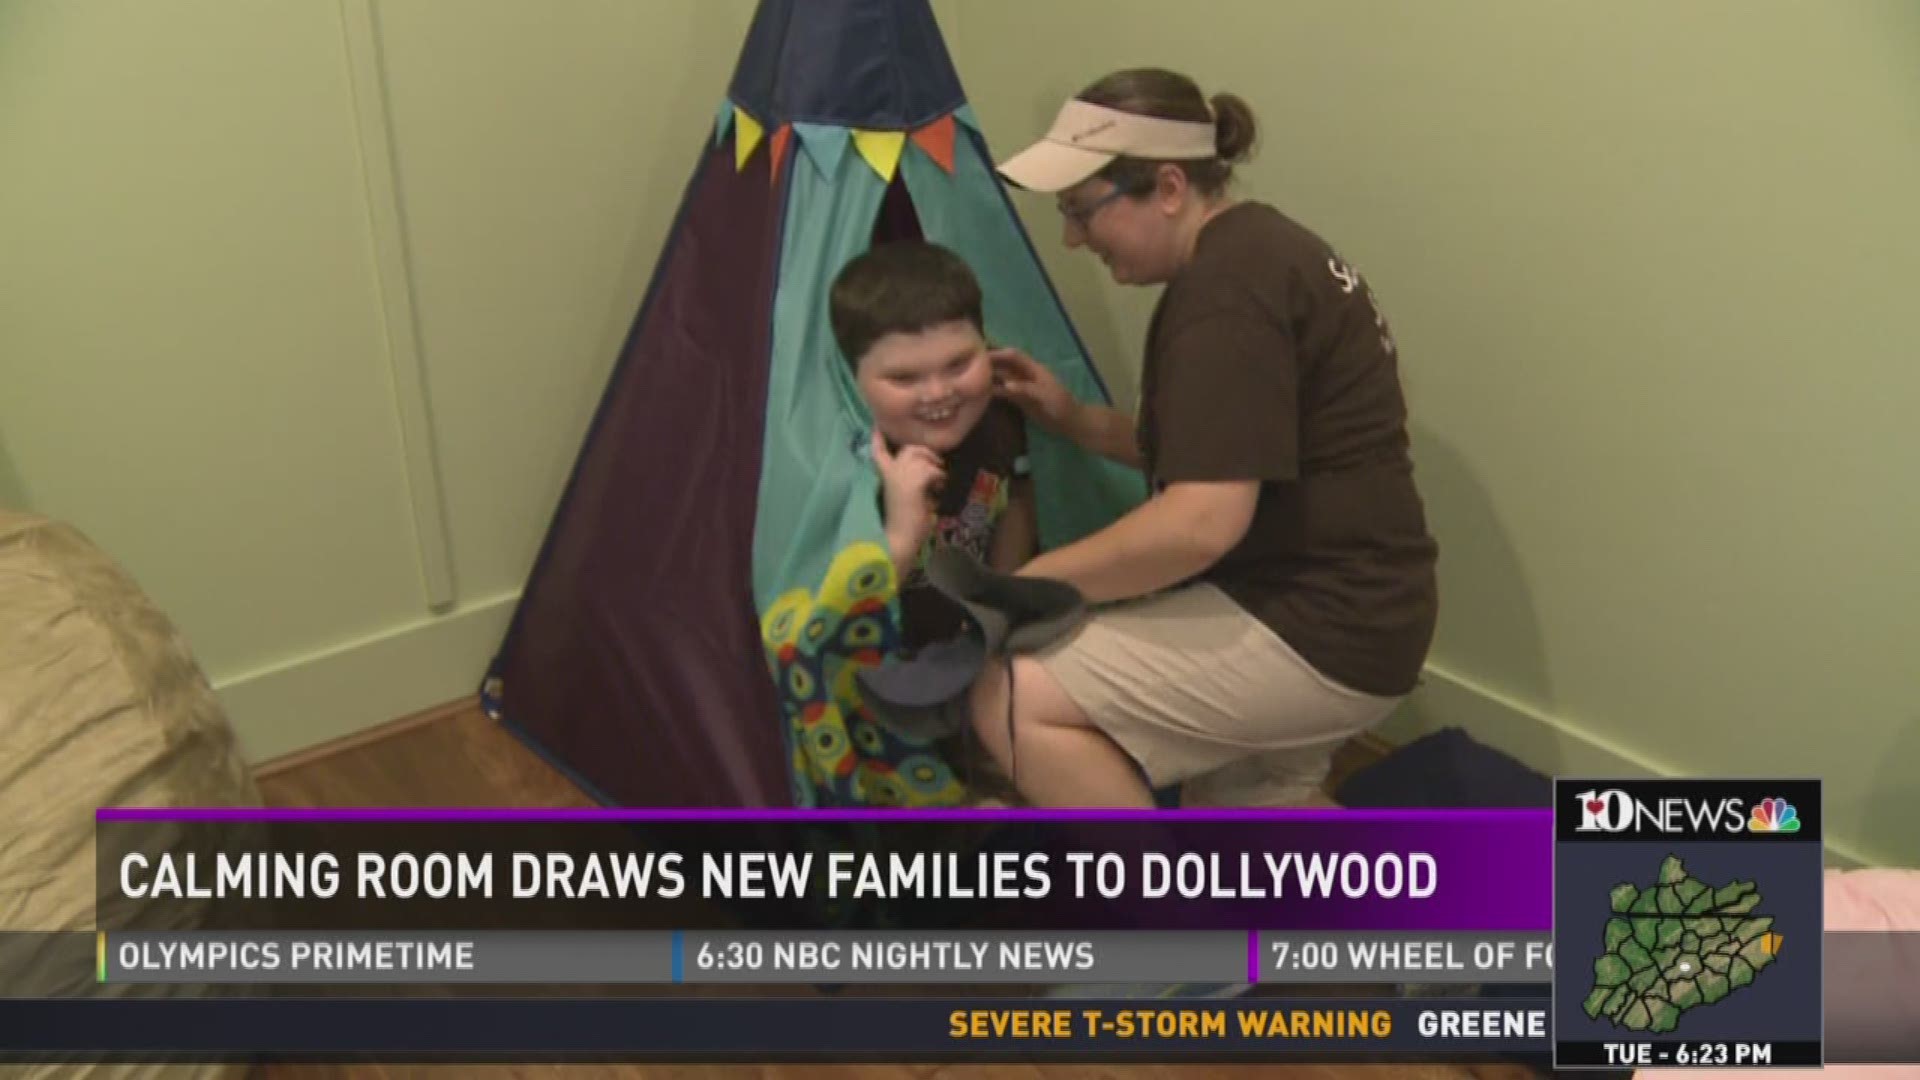 After adding a calming room for children with Autism, Dollywood has seen an increase in attendance of families who now feel like a day in the park is possible.